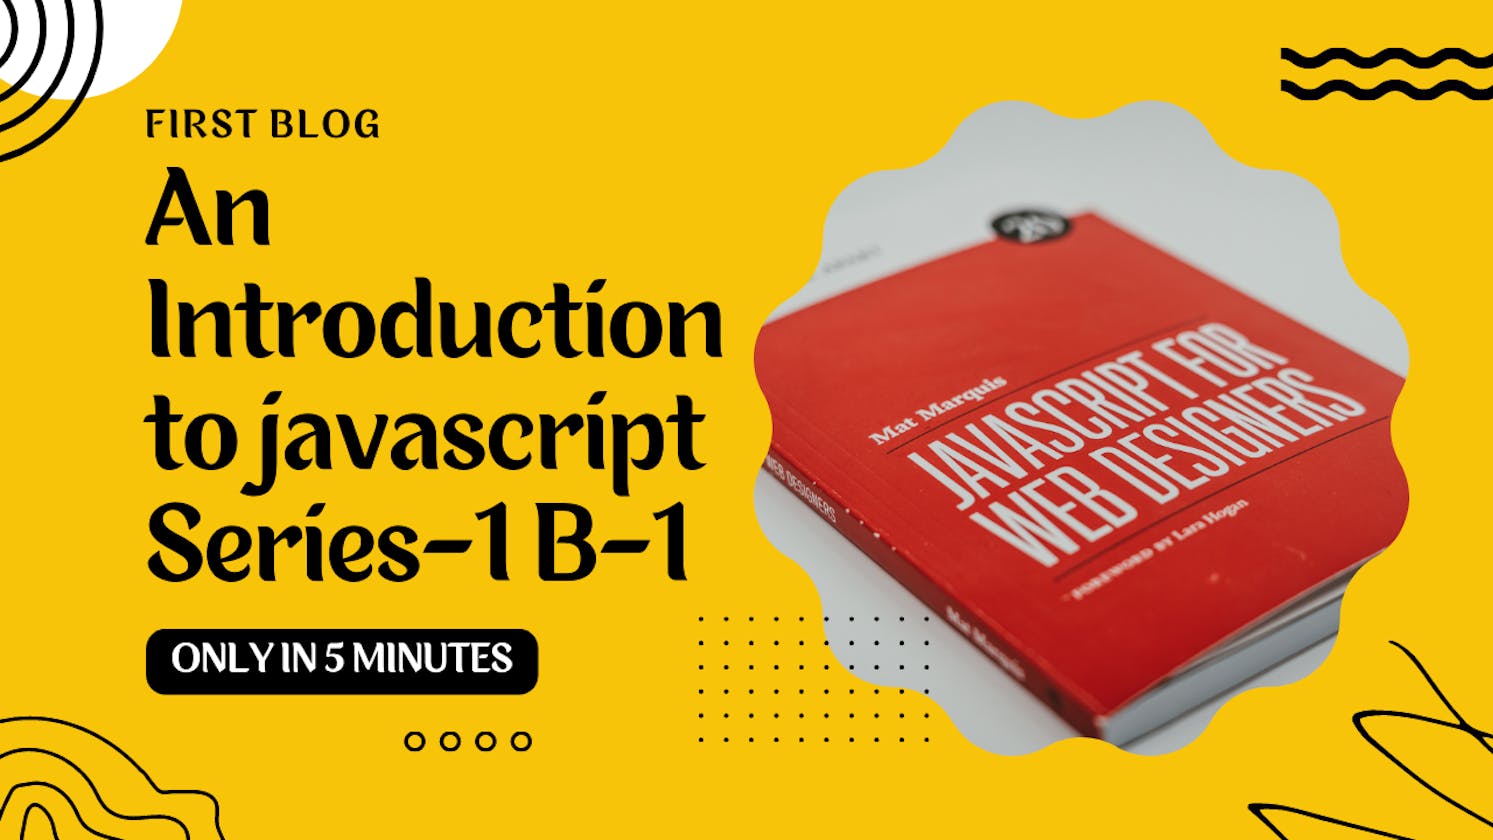 An Introduction to Javascript and some history of javascript  [S-1,B-1]